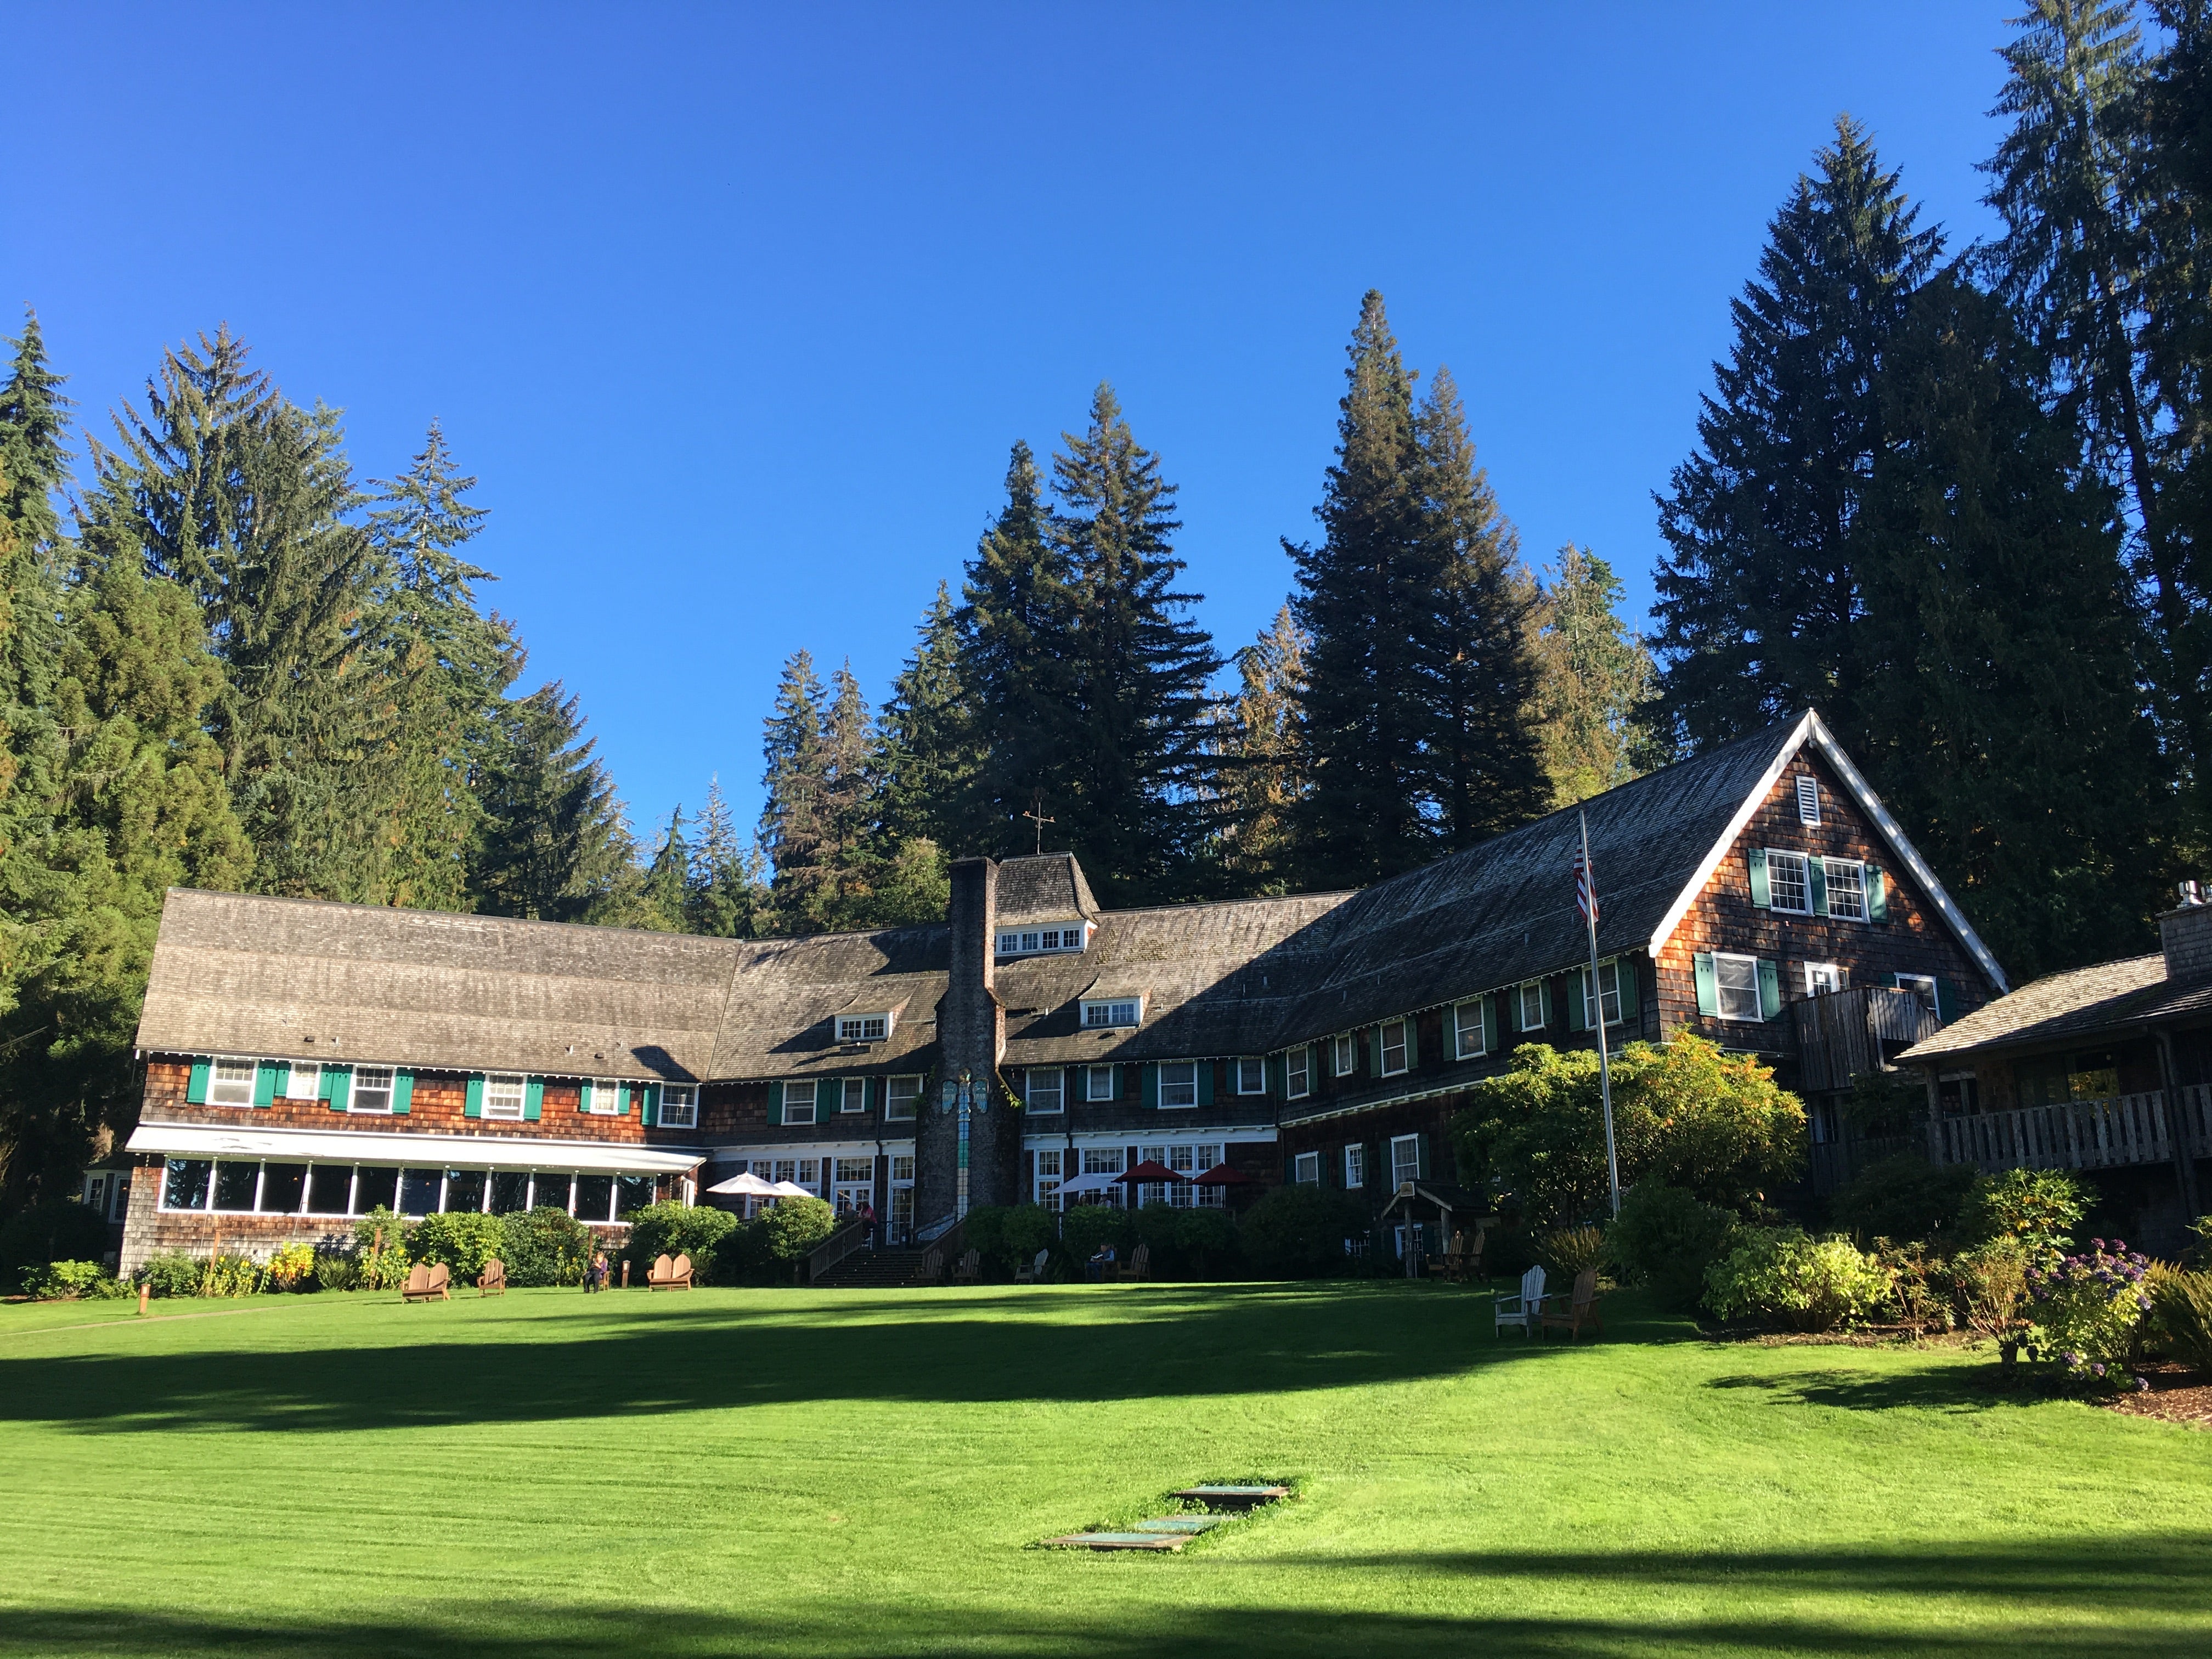 Lake Quinault Lodge.  You'll pass this on the way in to the campground.
